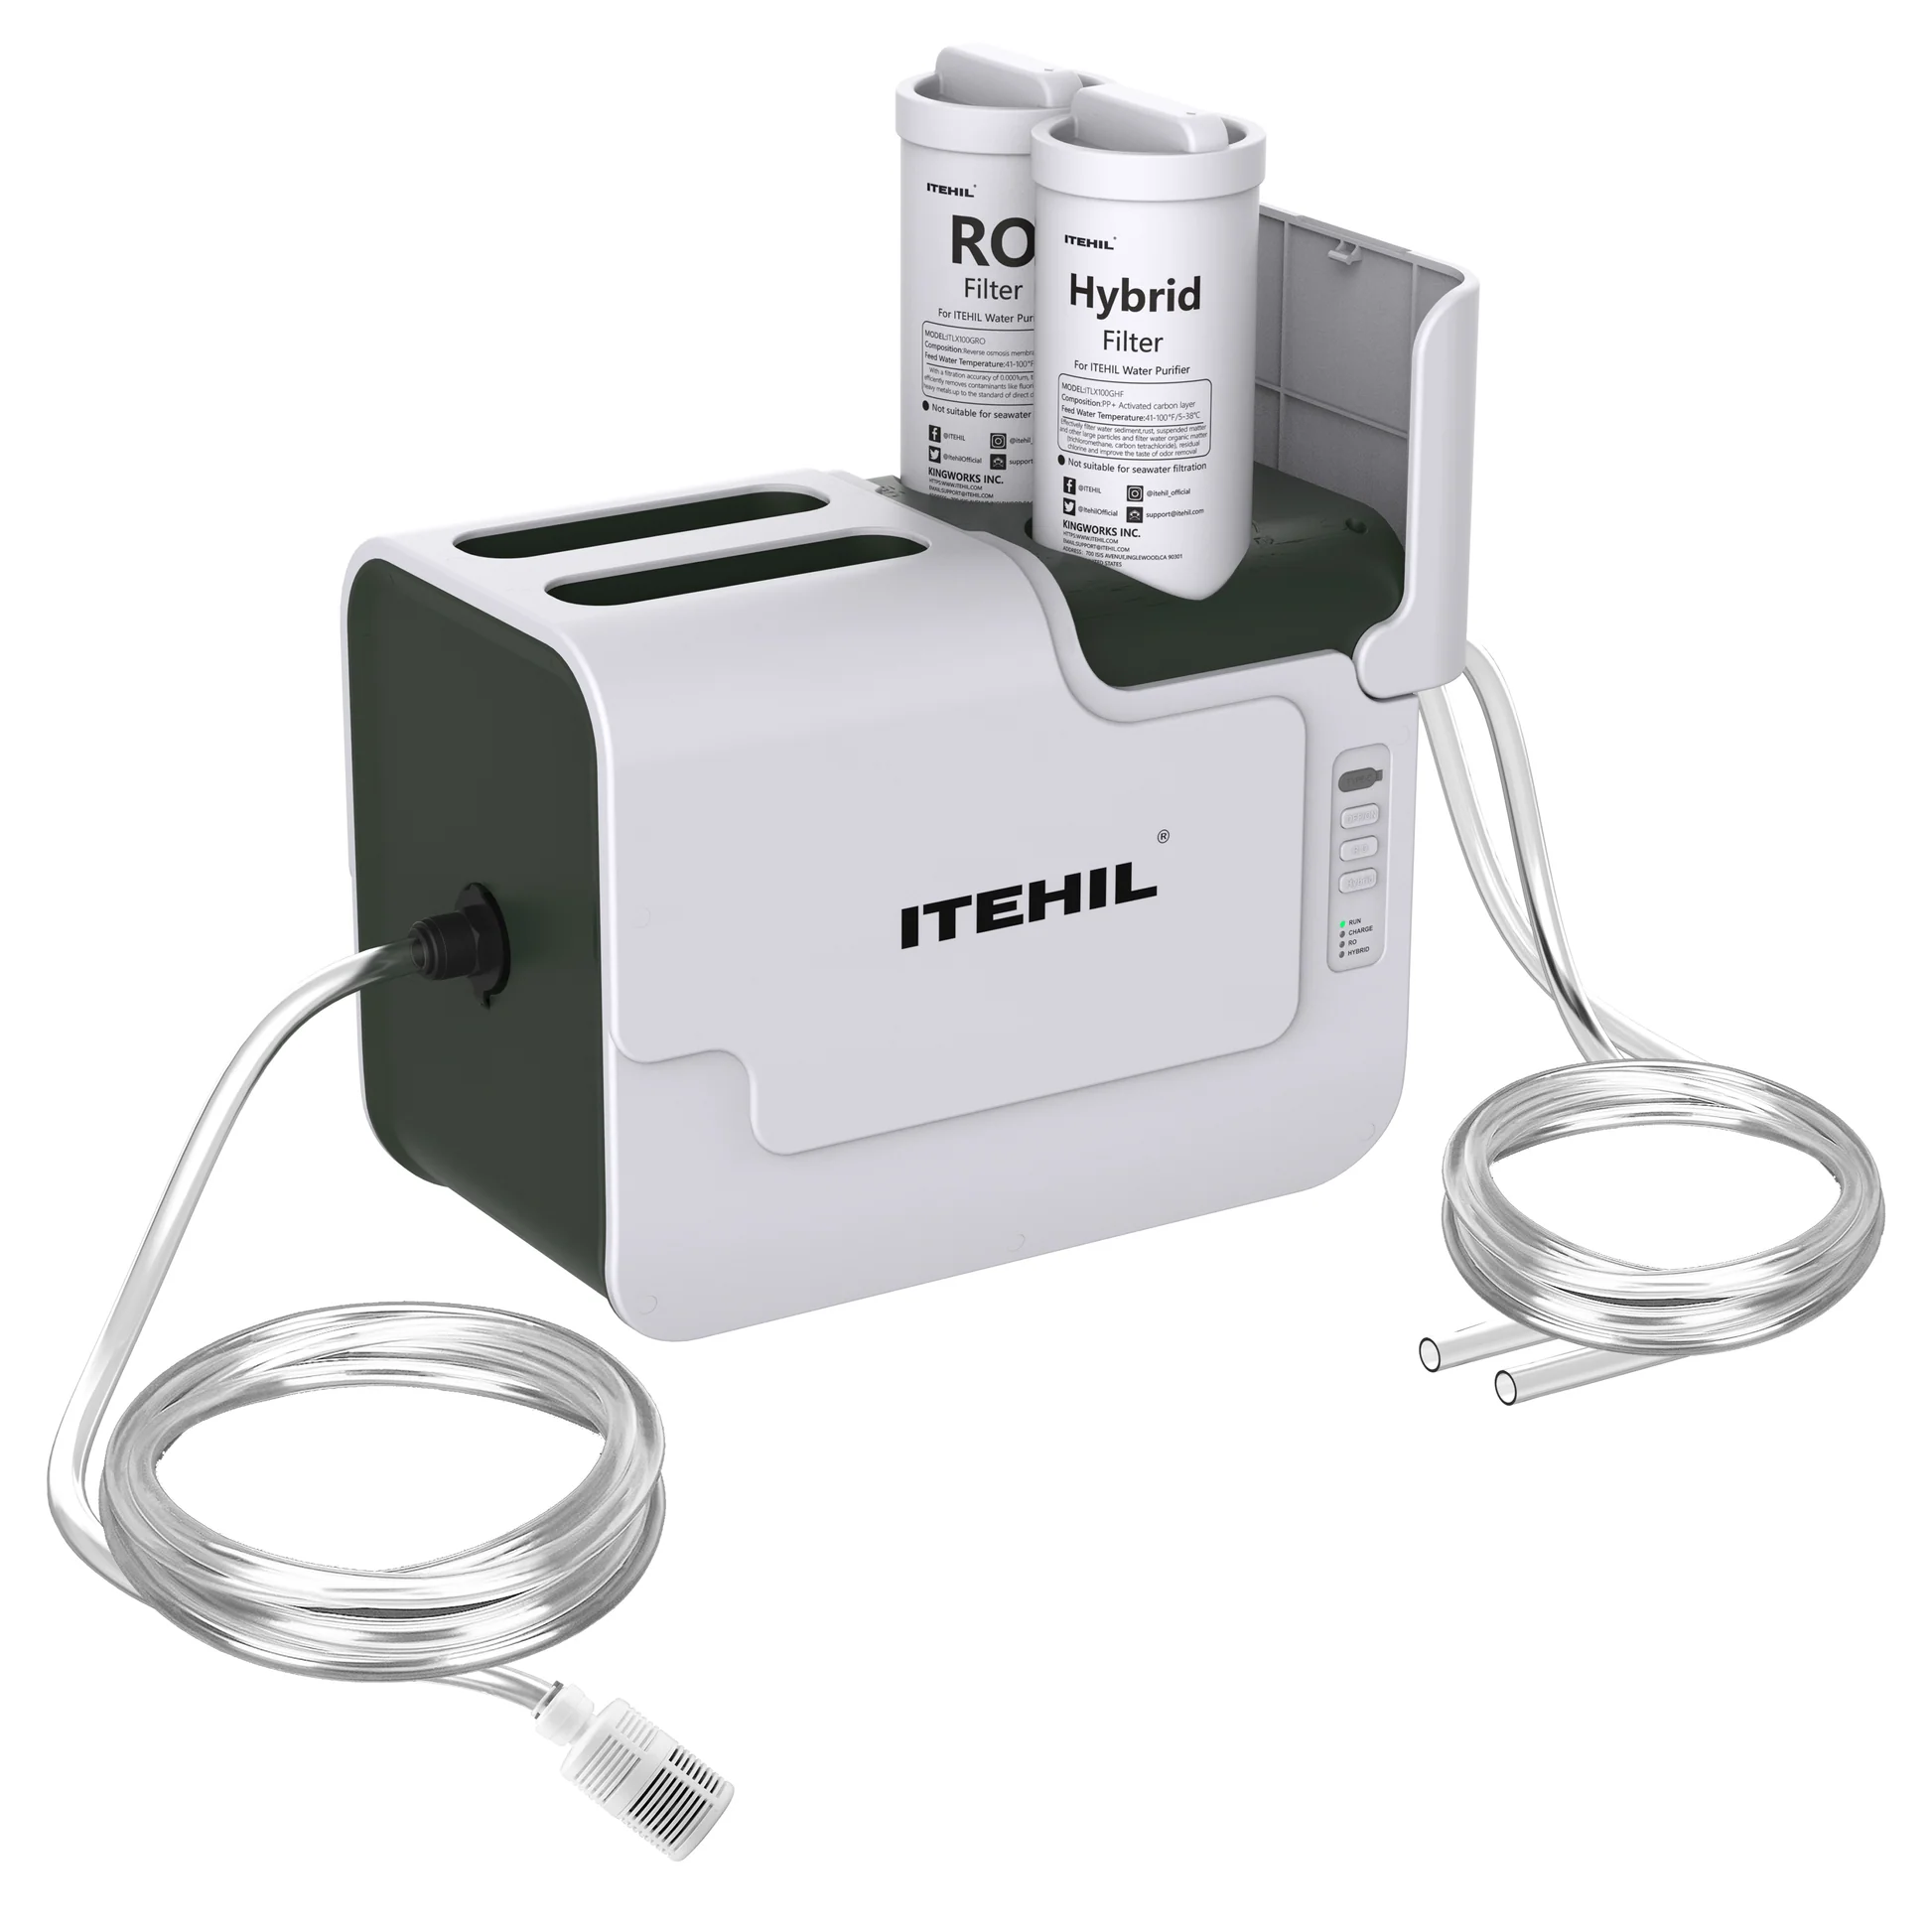 ITEHIL Portable Self Pump Water Filter System, Activated Carbon & Reverse Osmosis Membranes Water